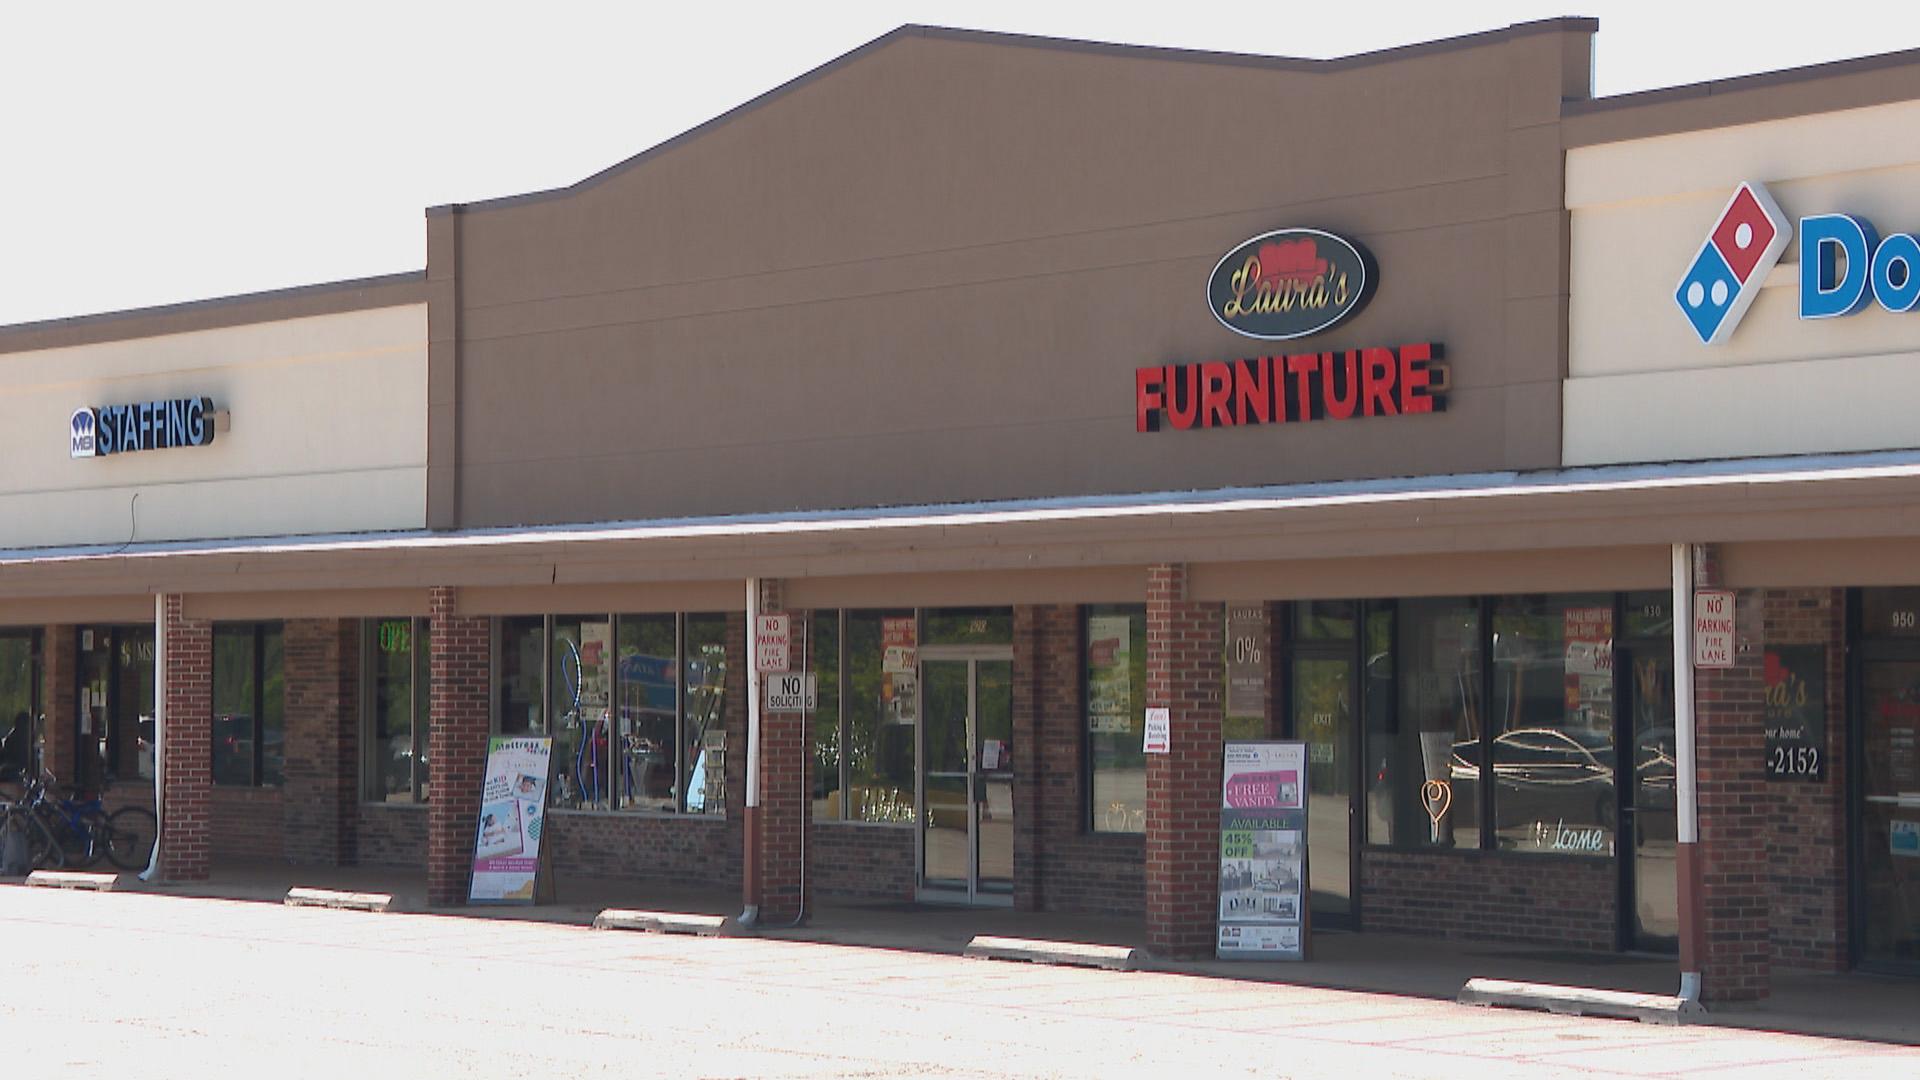 The Aurora City Council approved a $ 10,000 grant last week to Laura’s Furniture, owned by the girlfriend of Mayor Richard Irvin. (WTTW News)